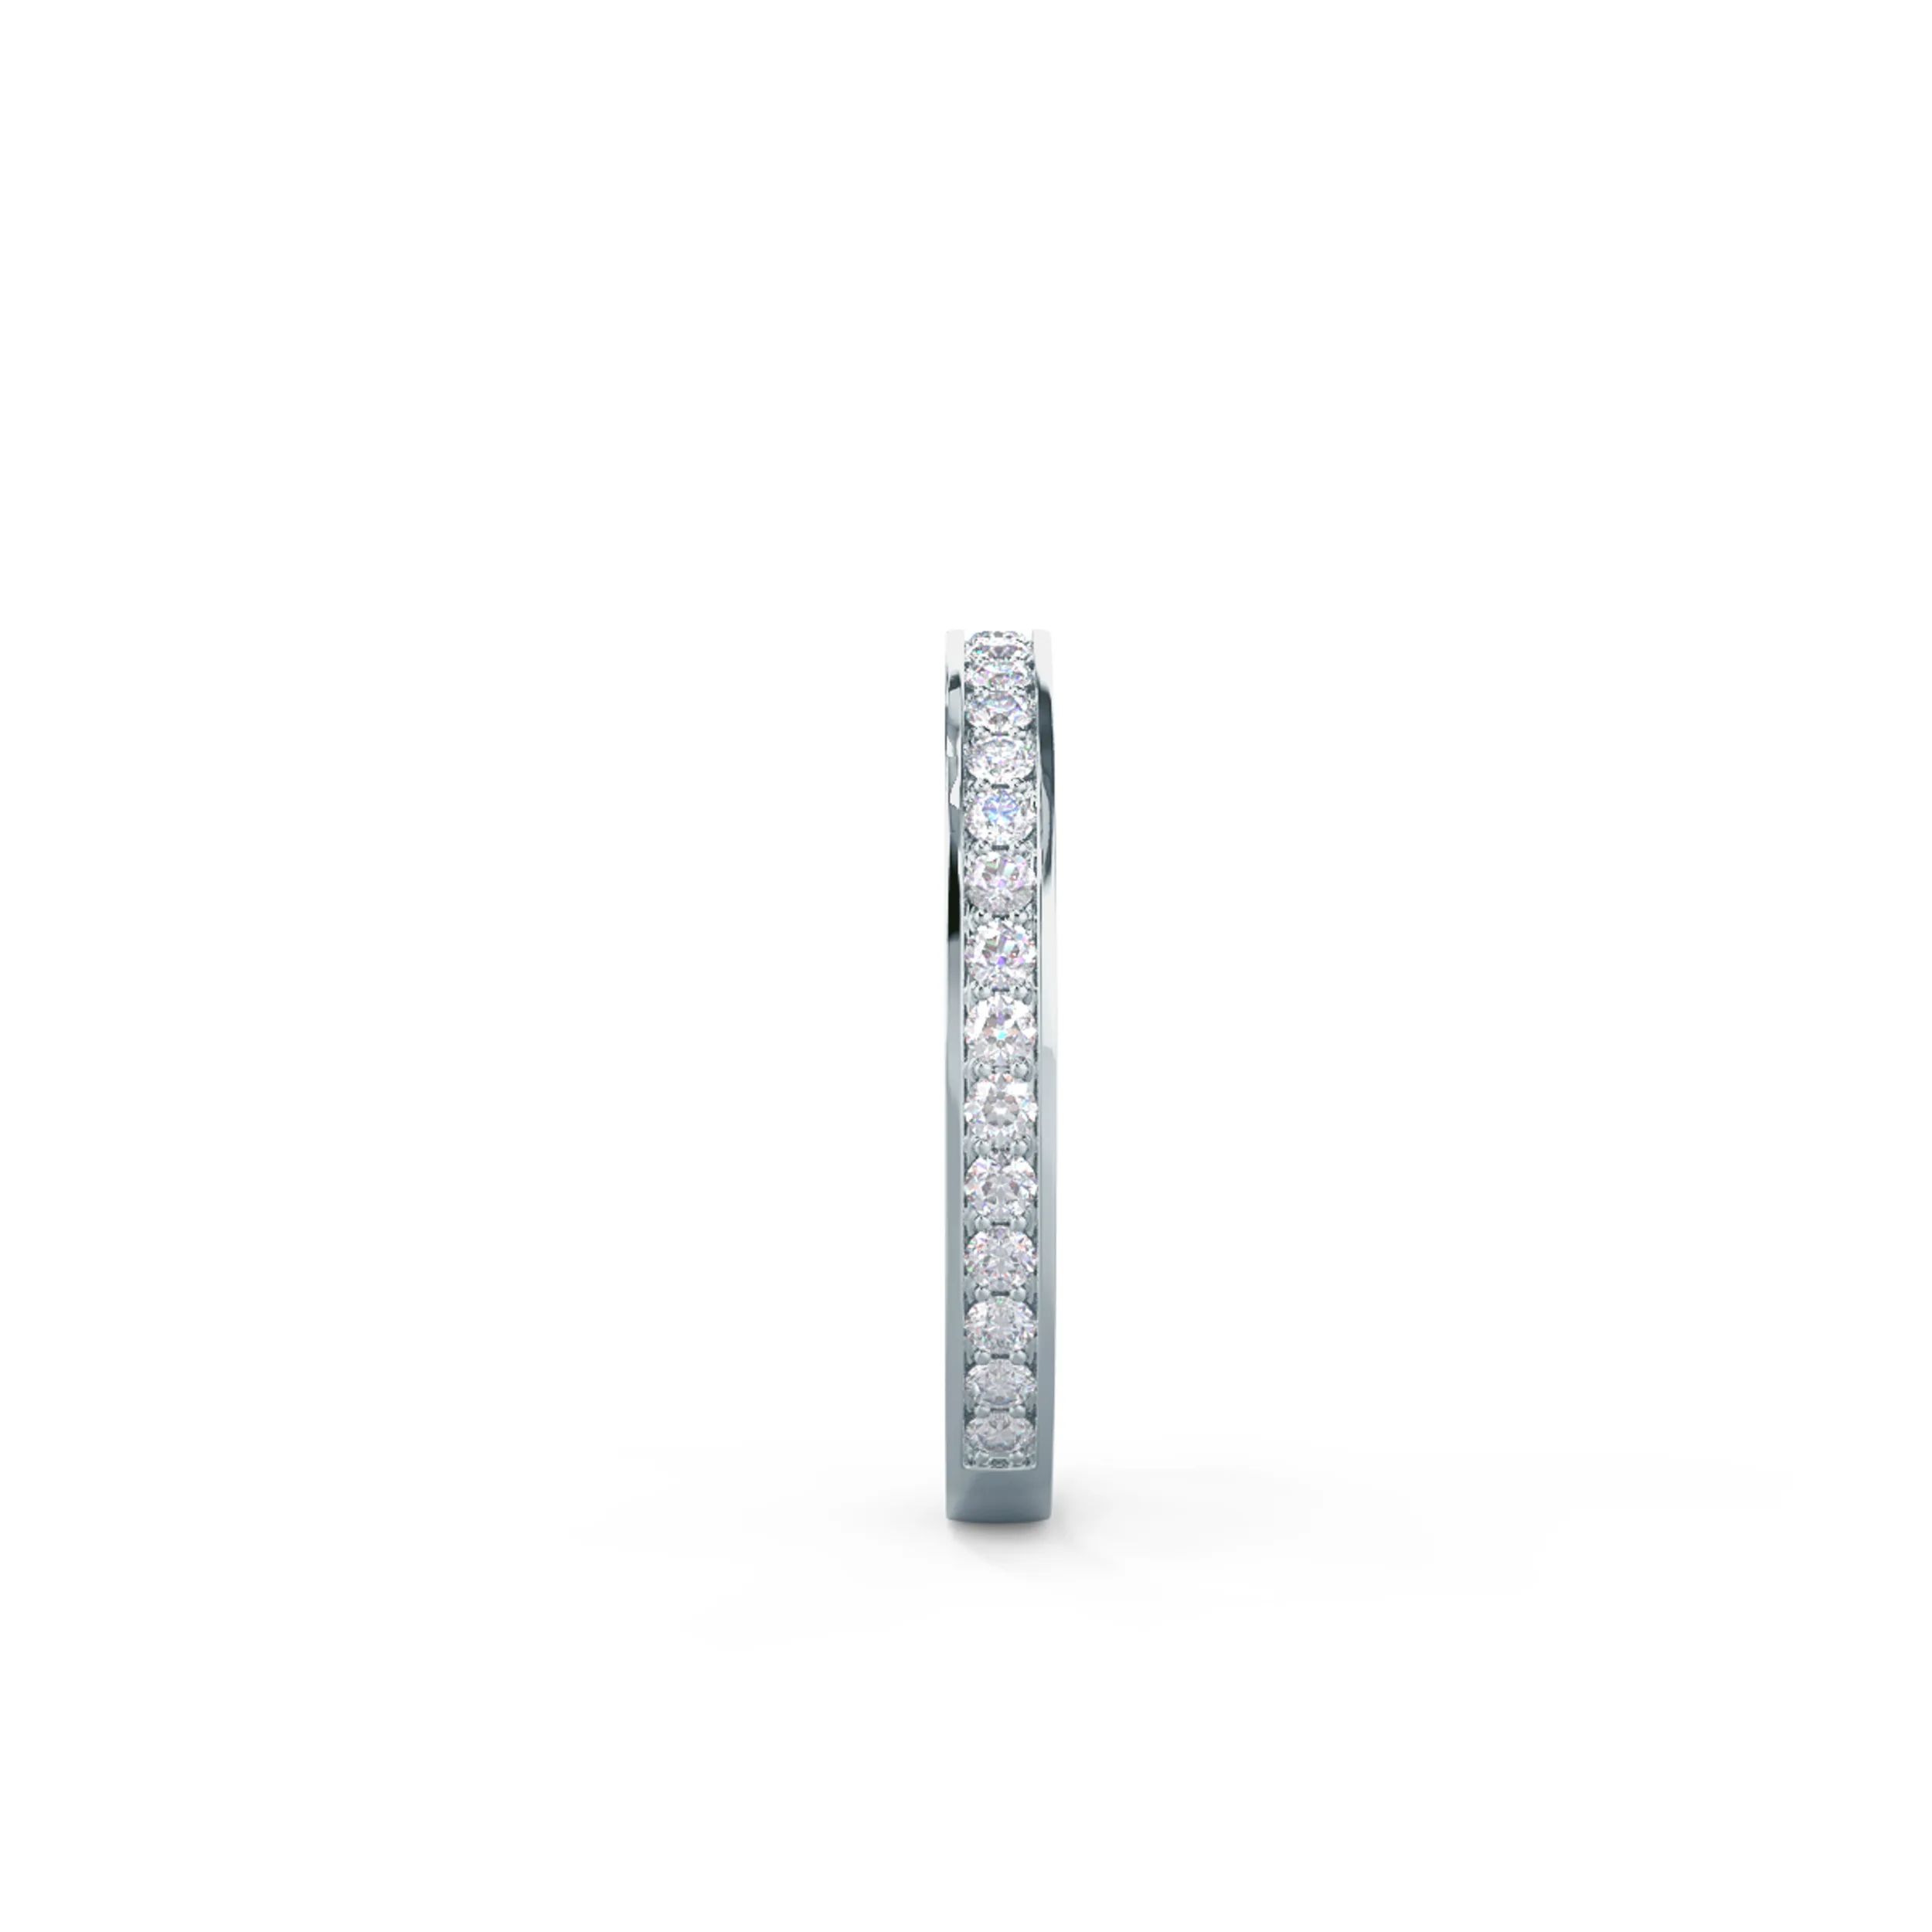 18k White Gold Channel Set Three Quarter Band featuring Exceptional Quality 0.45 Carat Round Diamonds (Side View)